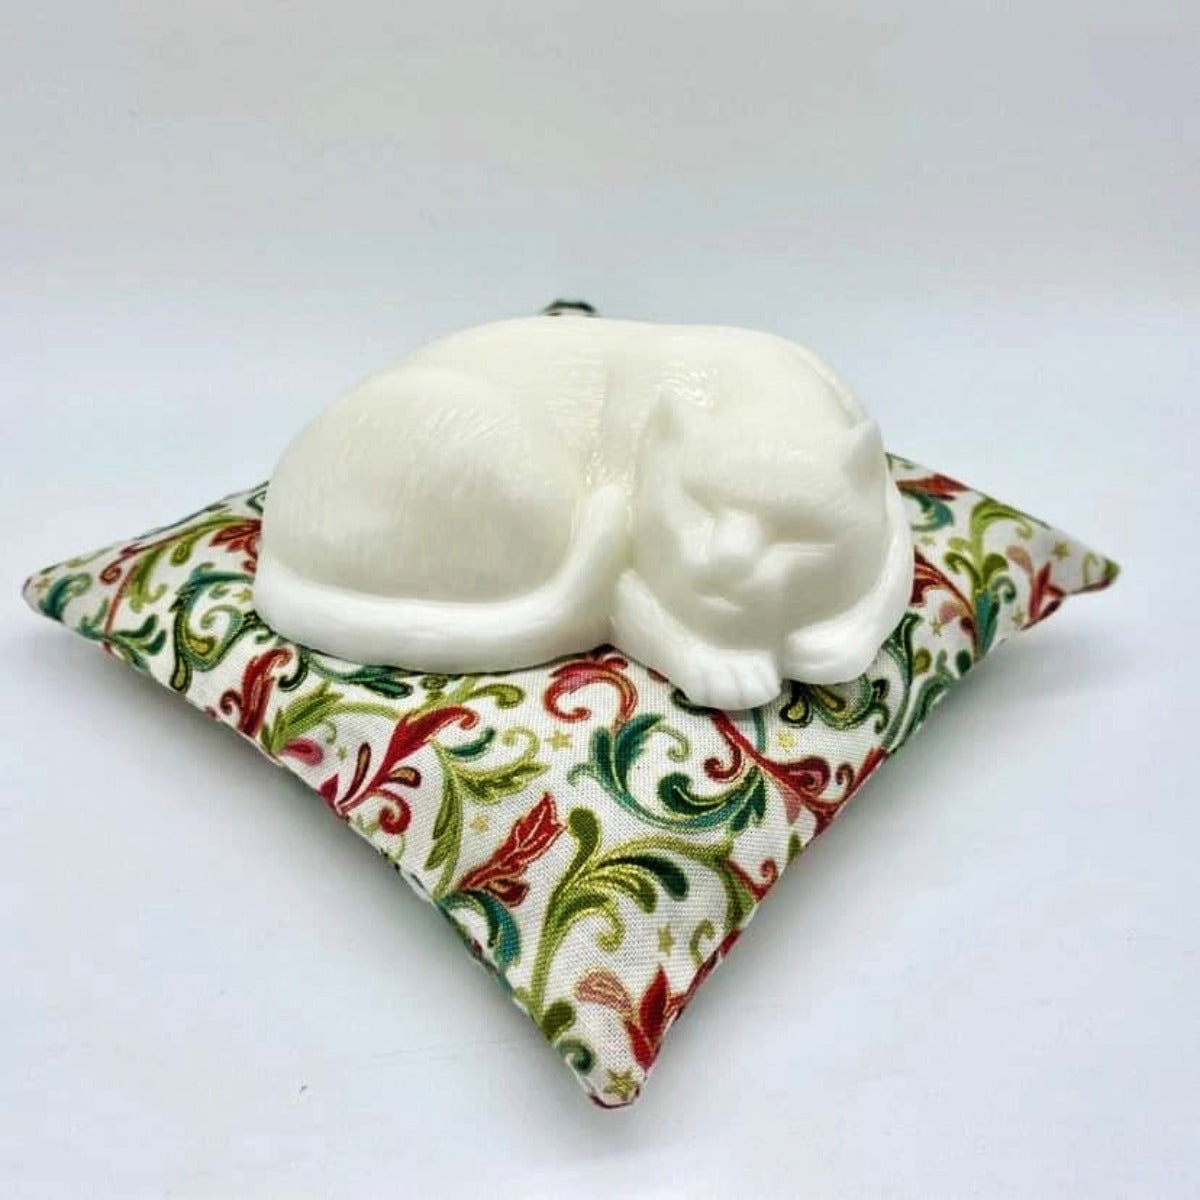 Mindfully sleeping white cat-shaped soap, symbolizing mindful beauty, resting on a red and green paisley print pillow